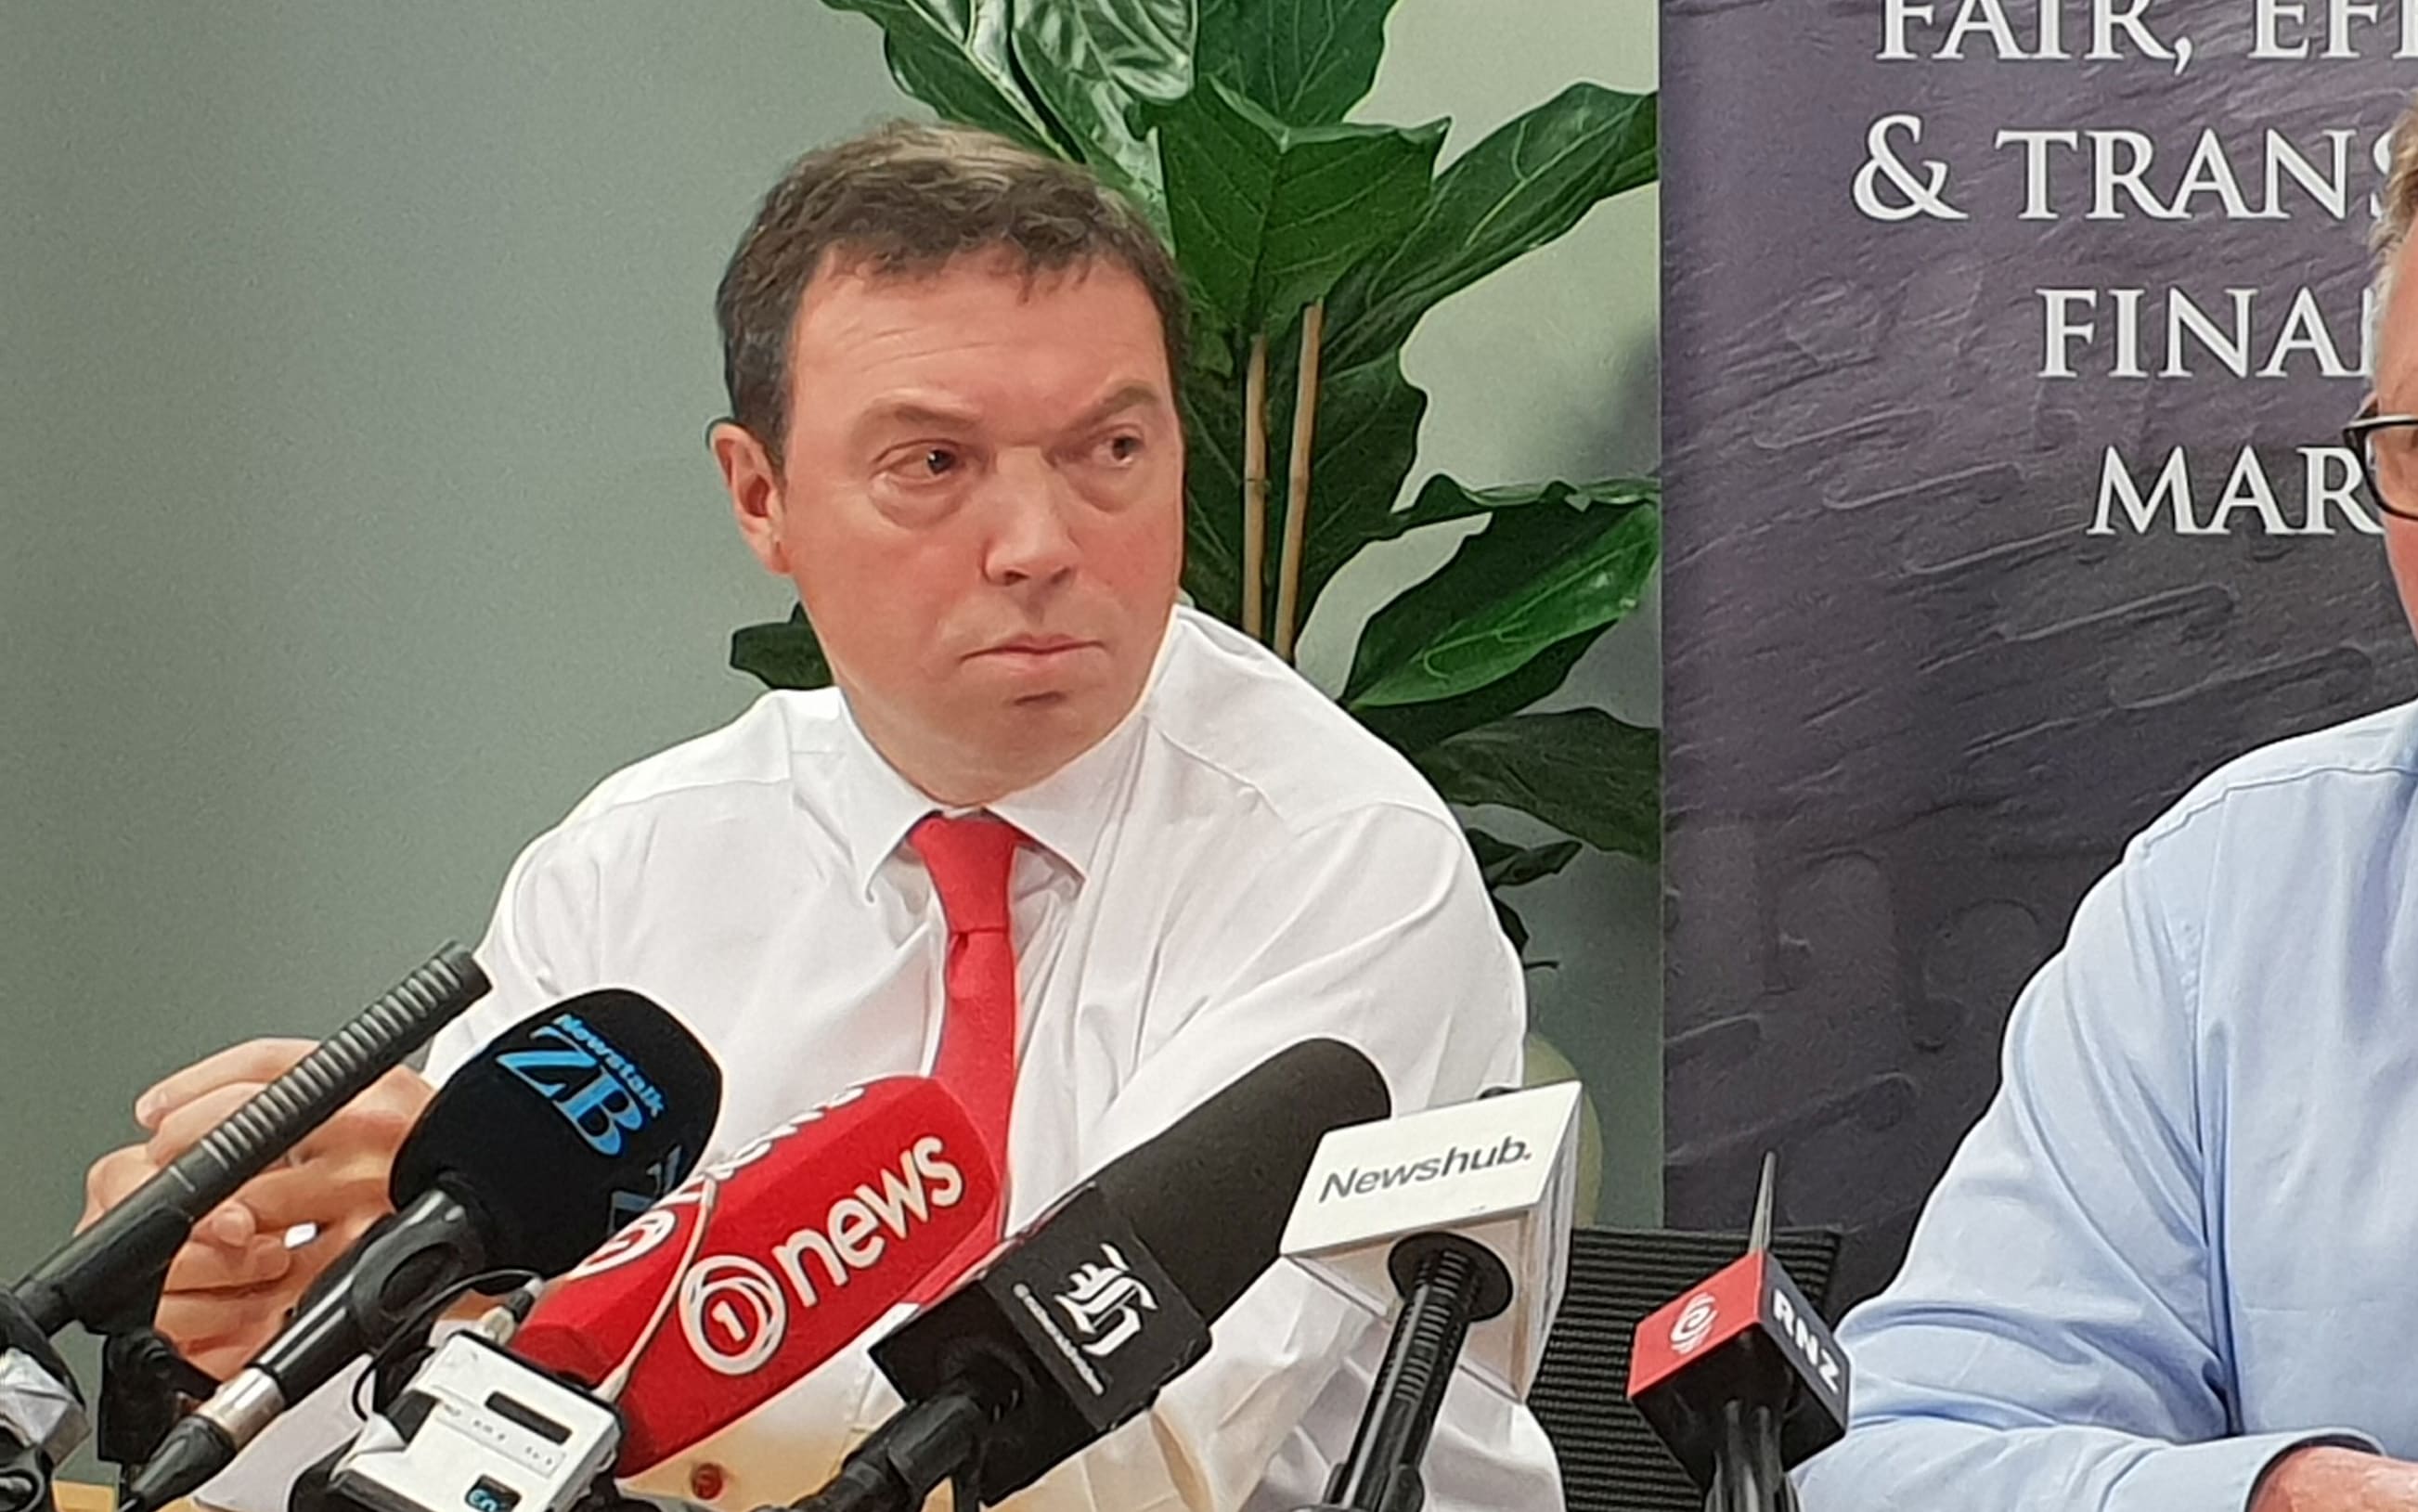 Financial markets authority head Rob Everett (left) and RBNZ Governor Adrian Orr talk about the insurance report.